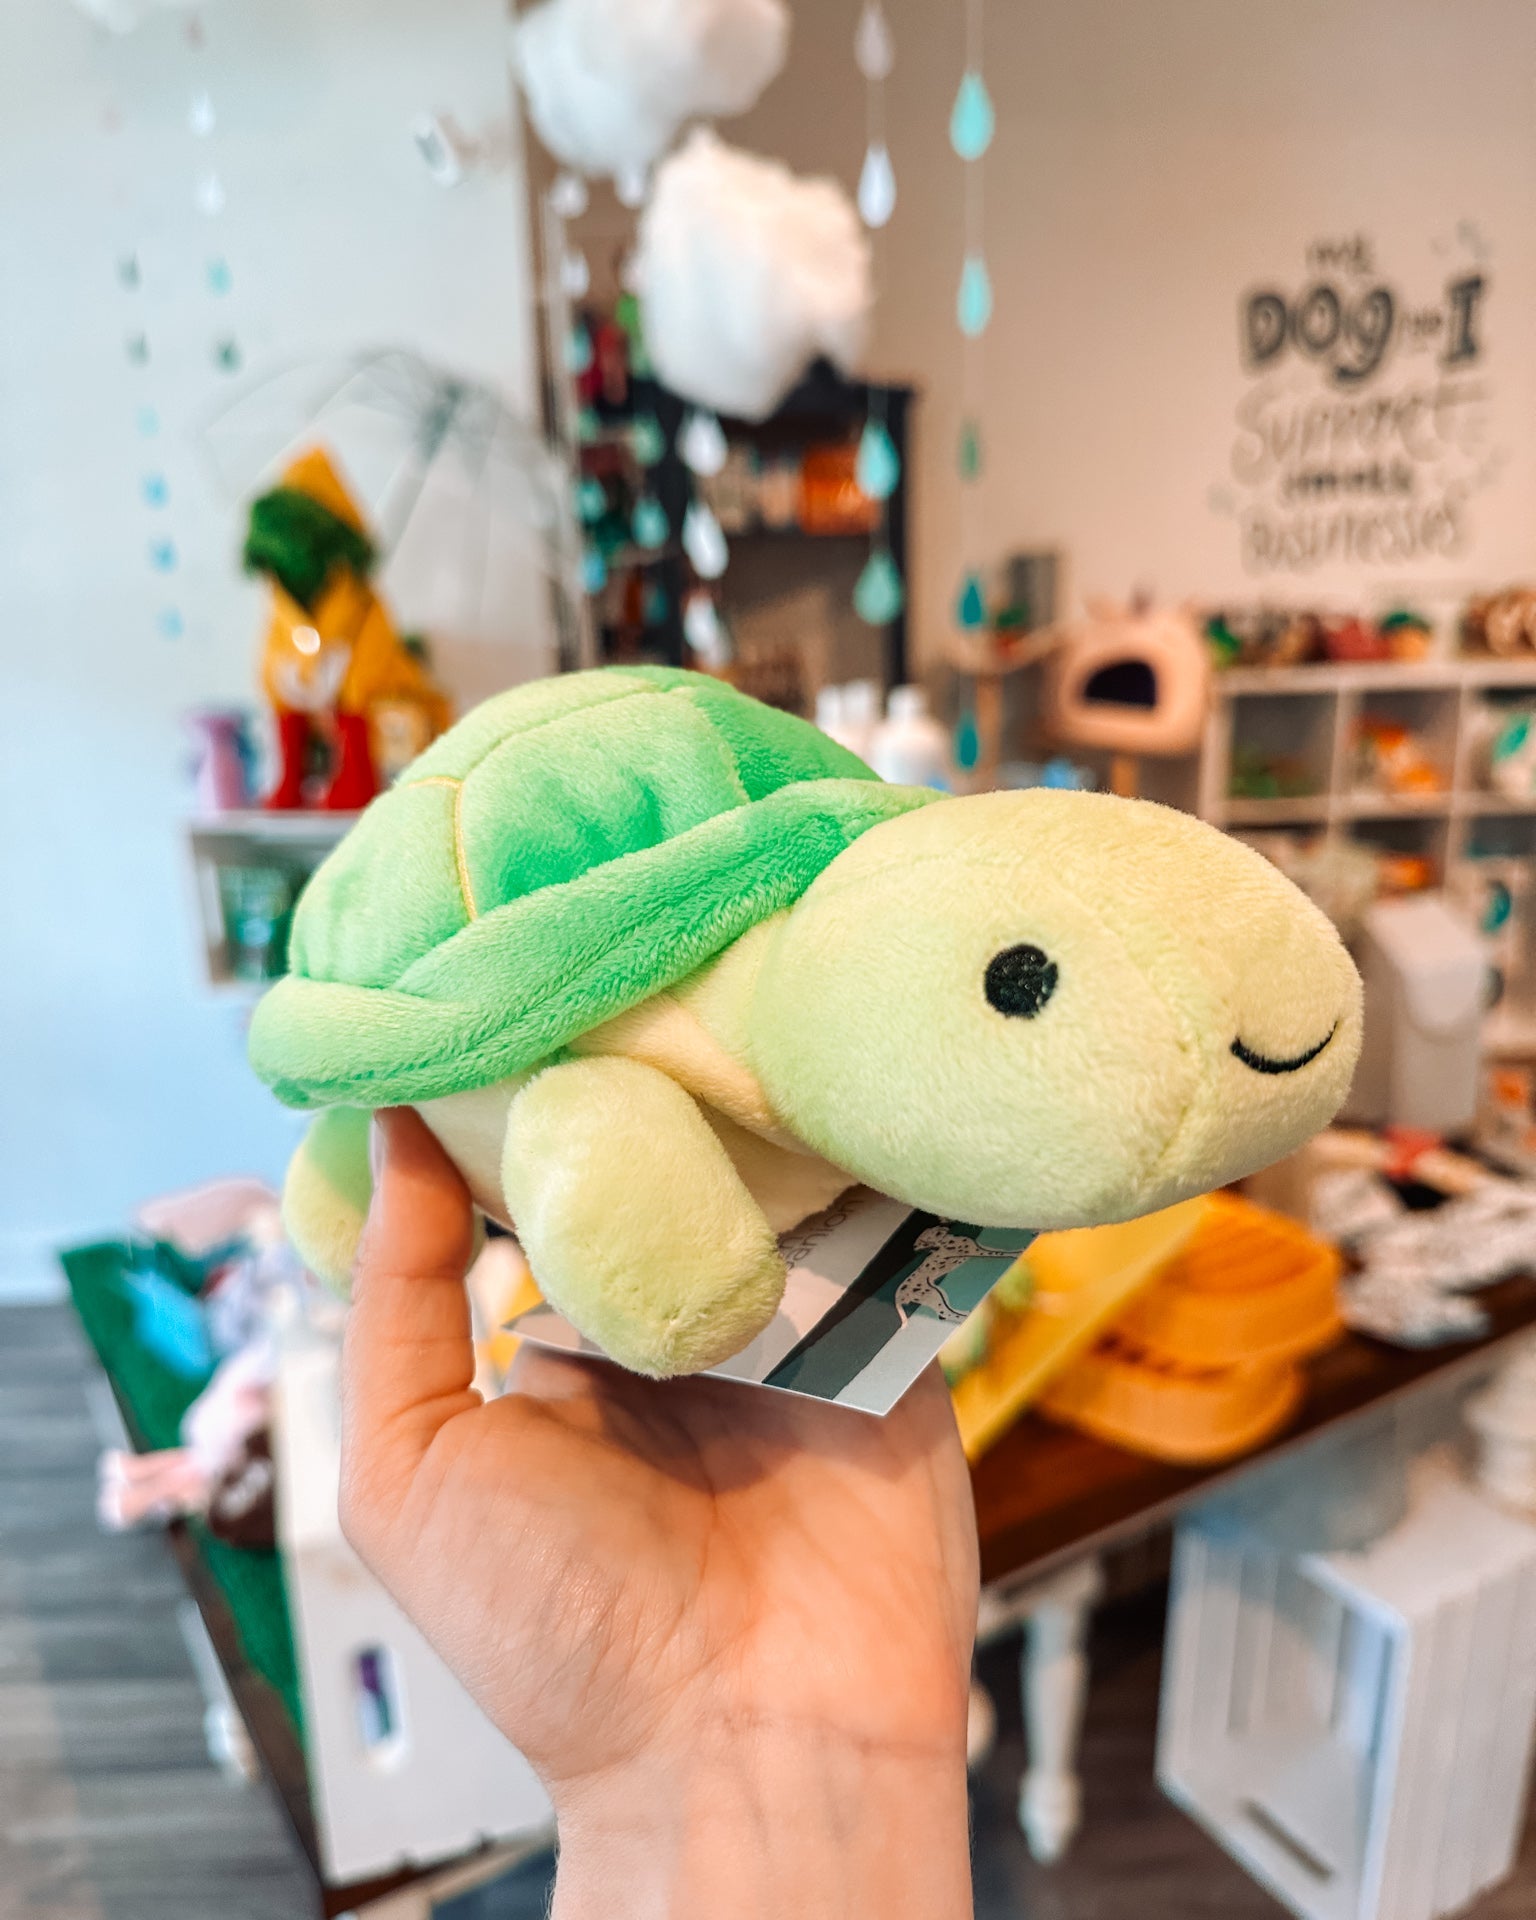 Turtle 3 in 1 Toy - Modern Companion